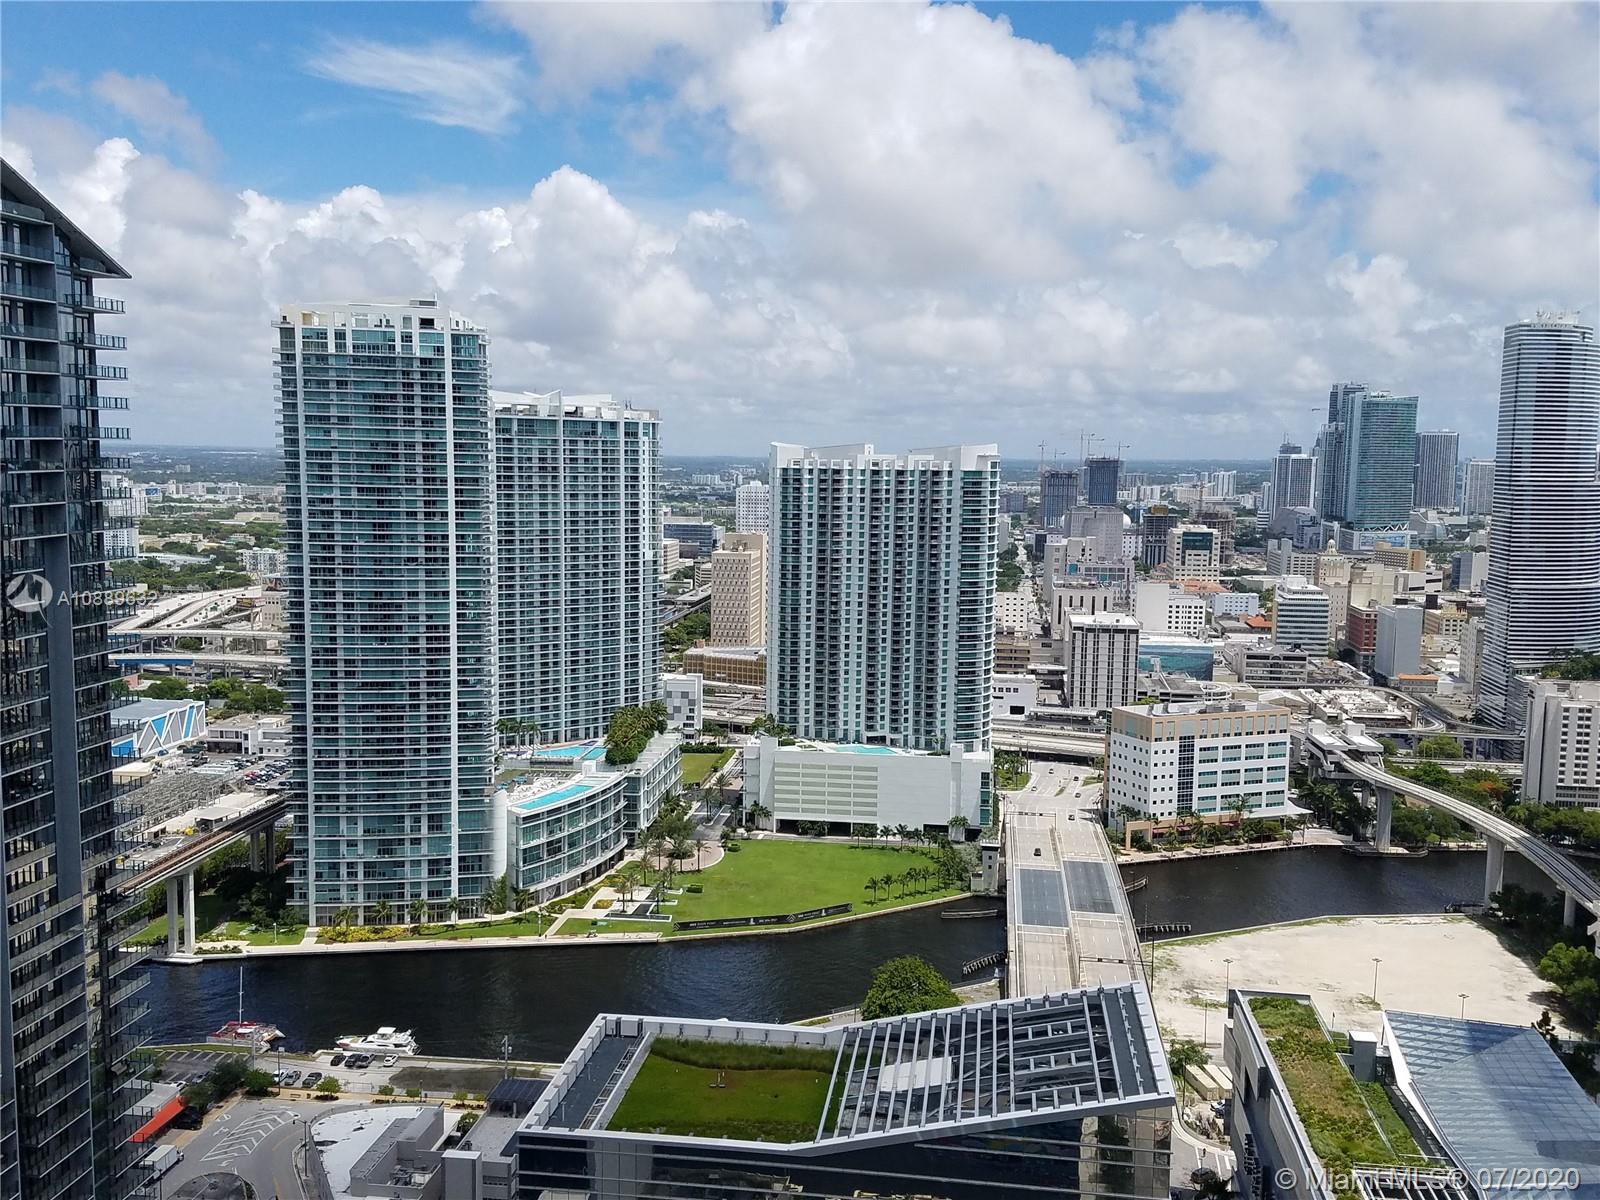 Brickell Heights East Tower image #1